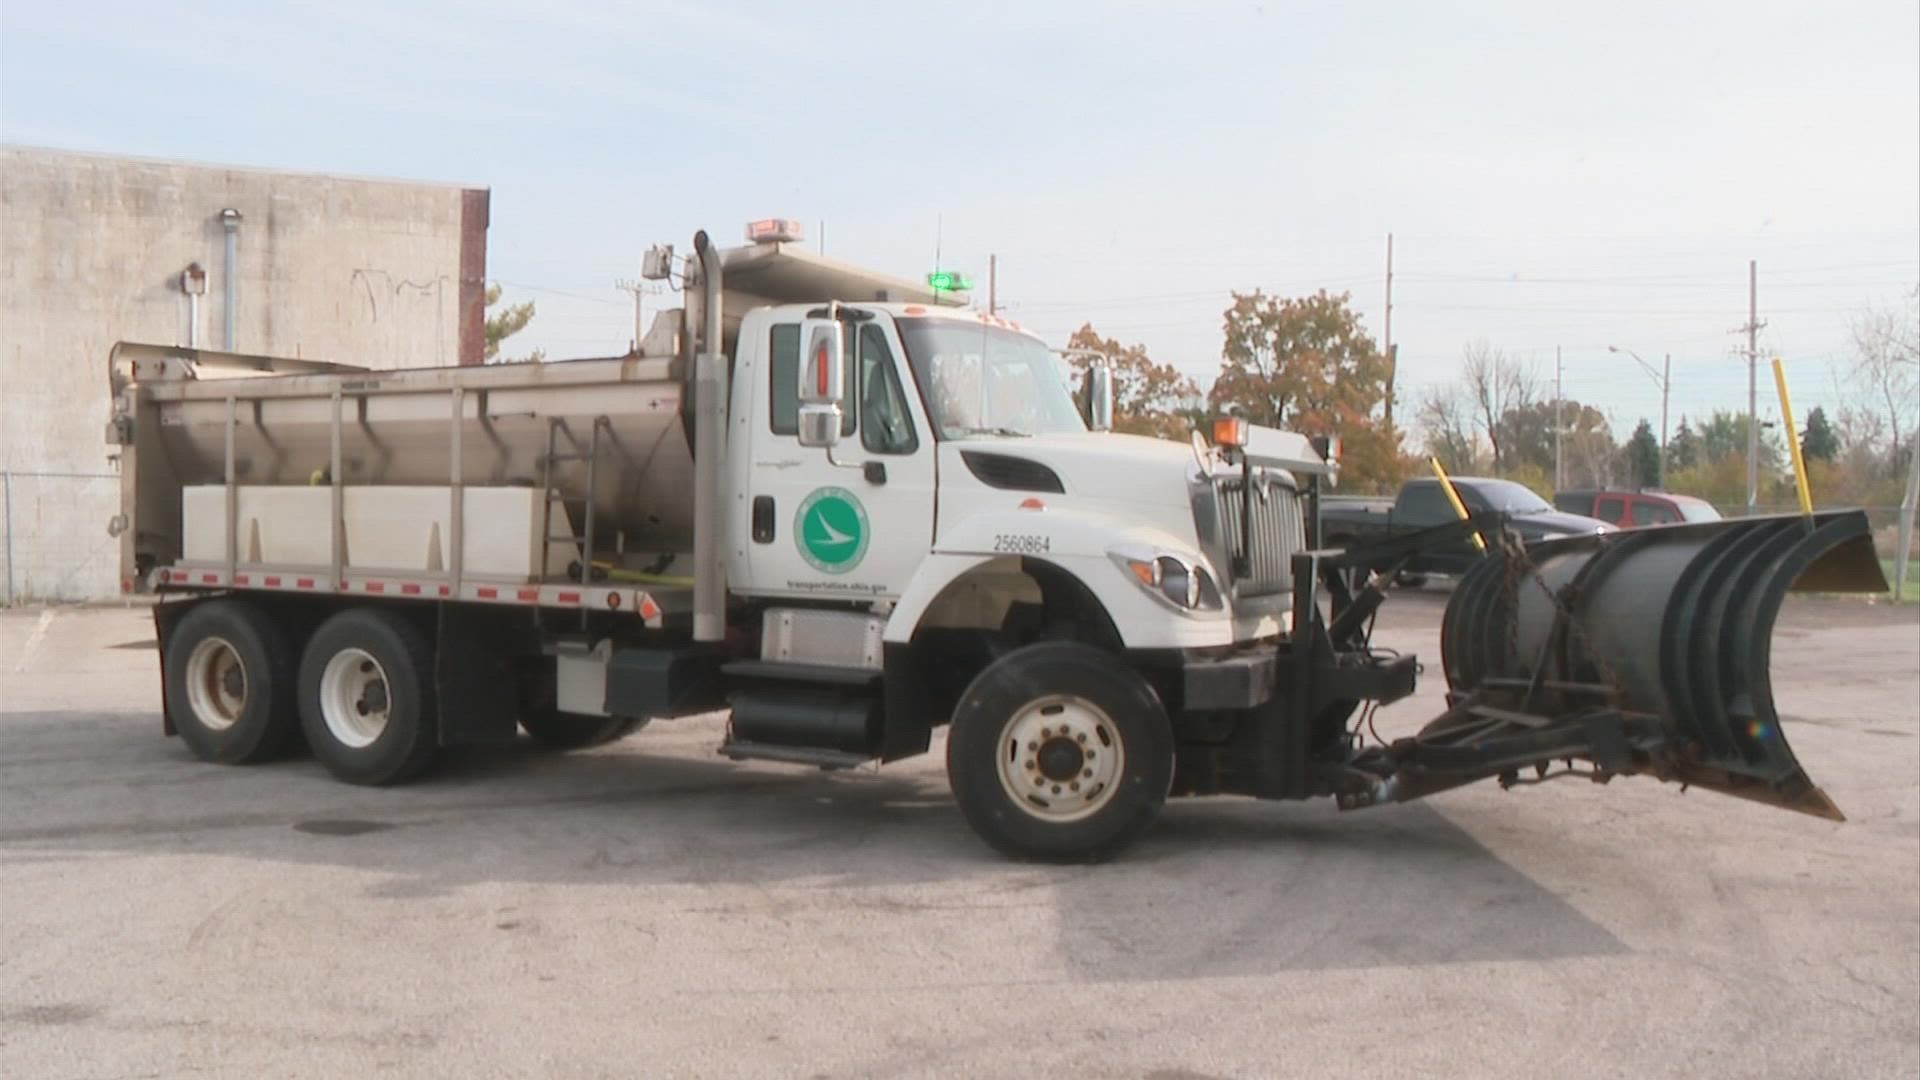 ODOT says there is no way to treat roads ahead of a freezing rain storm and, once the roads are treated, the materials can be easily washed away.